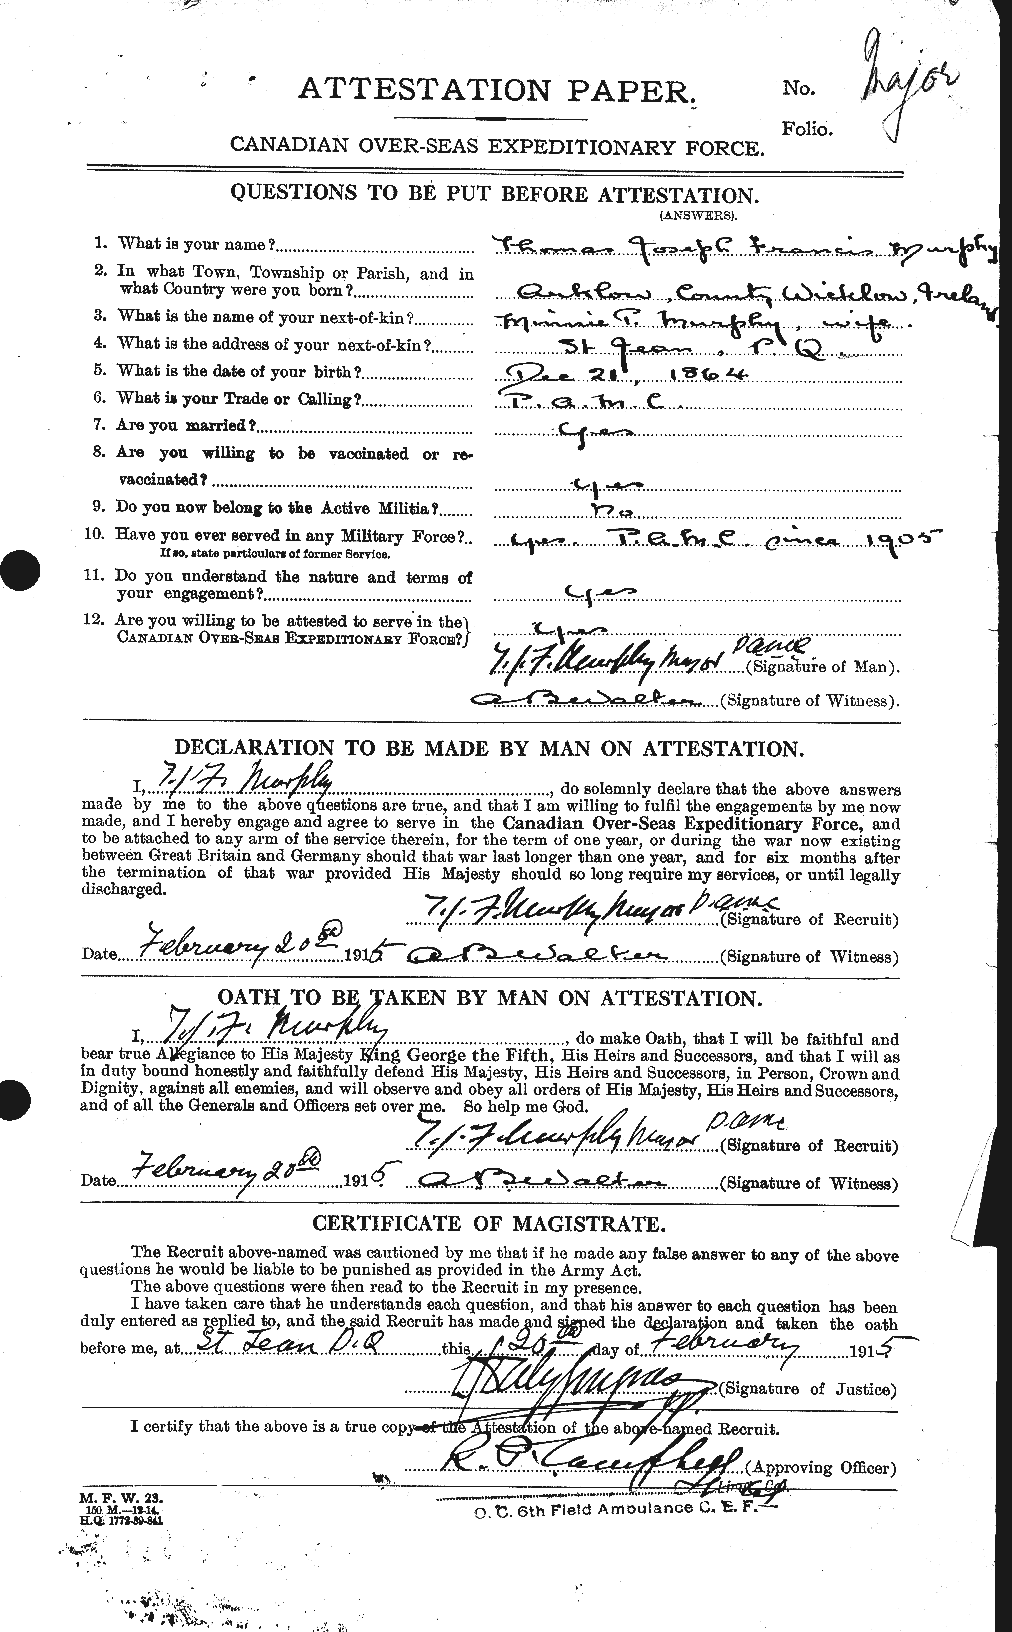 Personnel Records of the First World War - CEF 512259a